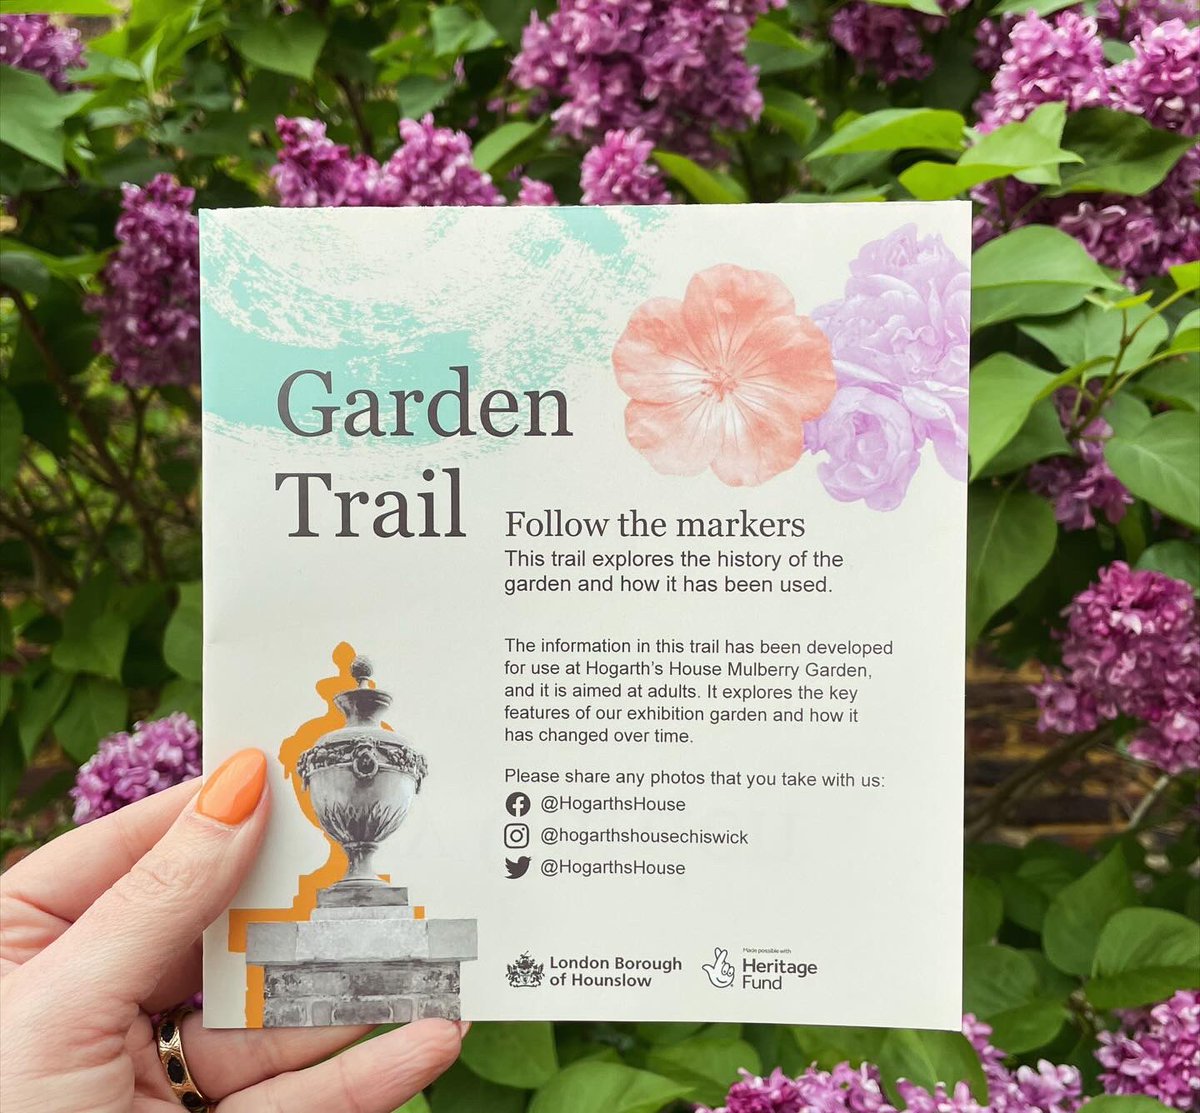 Stop and - literally - smell the flowers with one of our #FREE mindful Trails at #Hogarth’s, showcasing our lovely #MulberryGarden. The #Spring Trail, aimed at kiddos and their grownups, and our #Garden Trail, aimed at adults! Pick one up at the main desk 🩷🪻🌳🌷💜🗺️